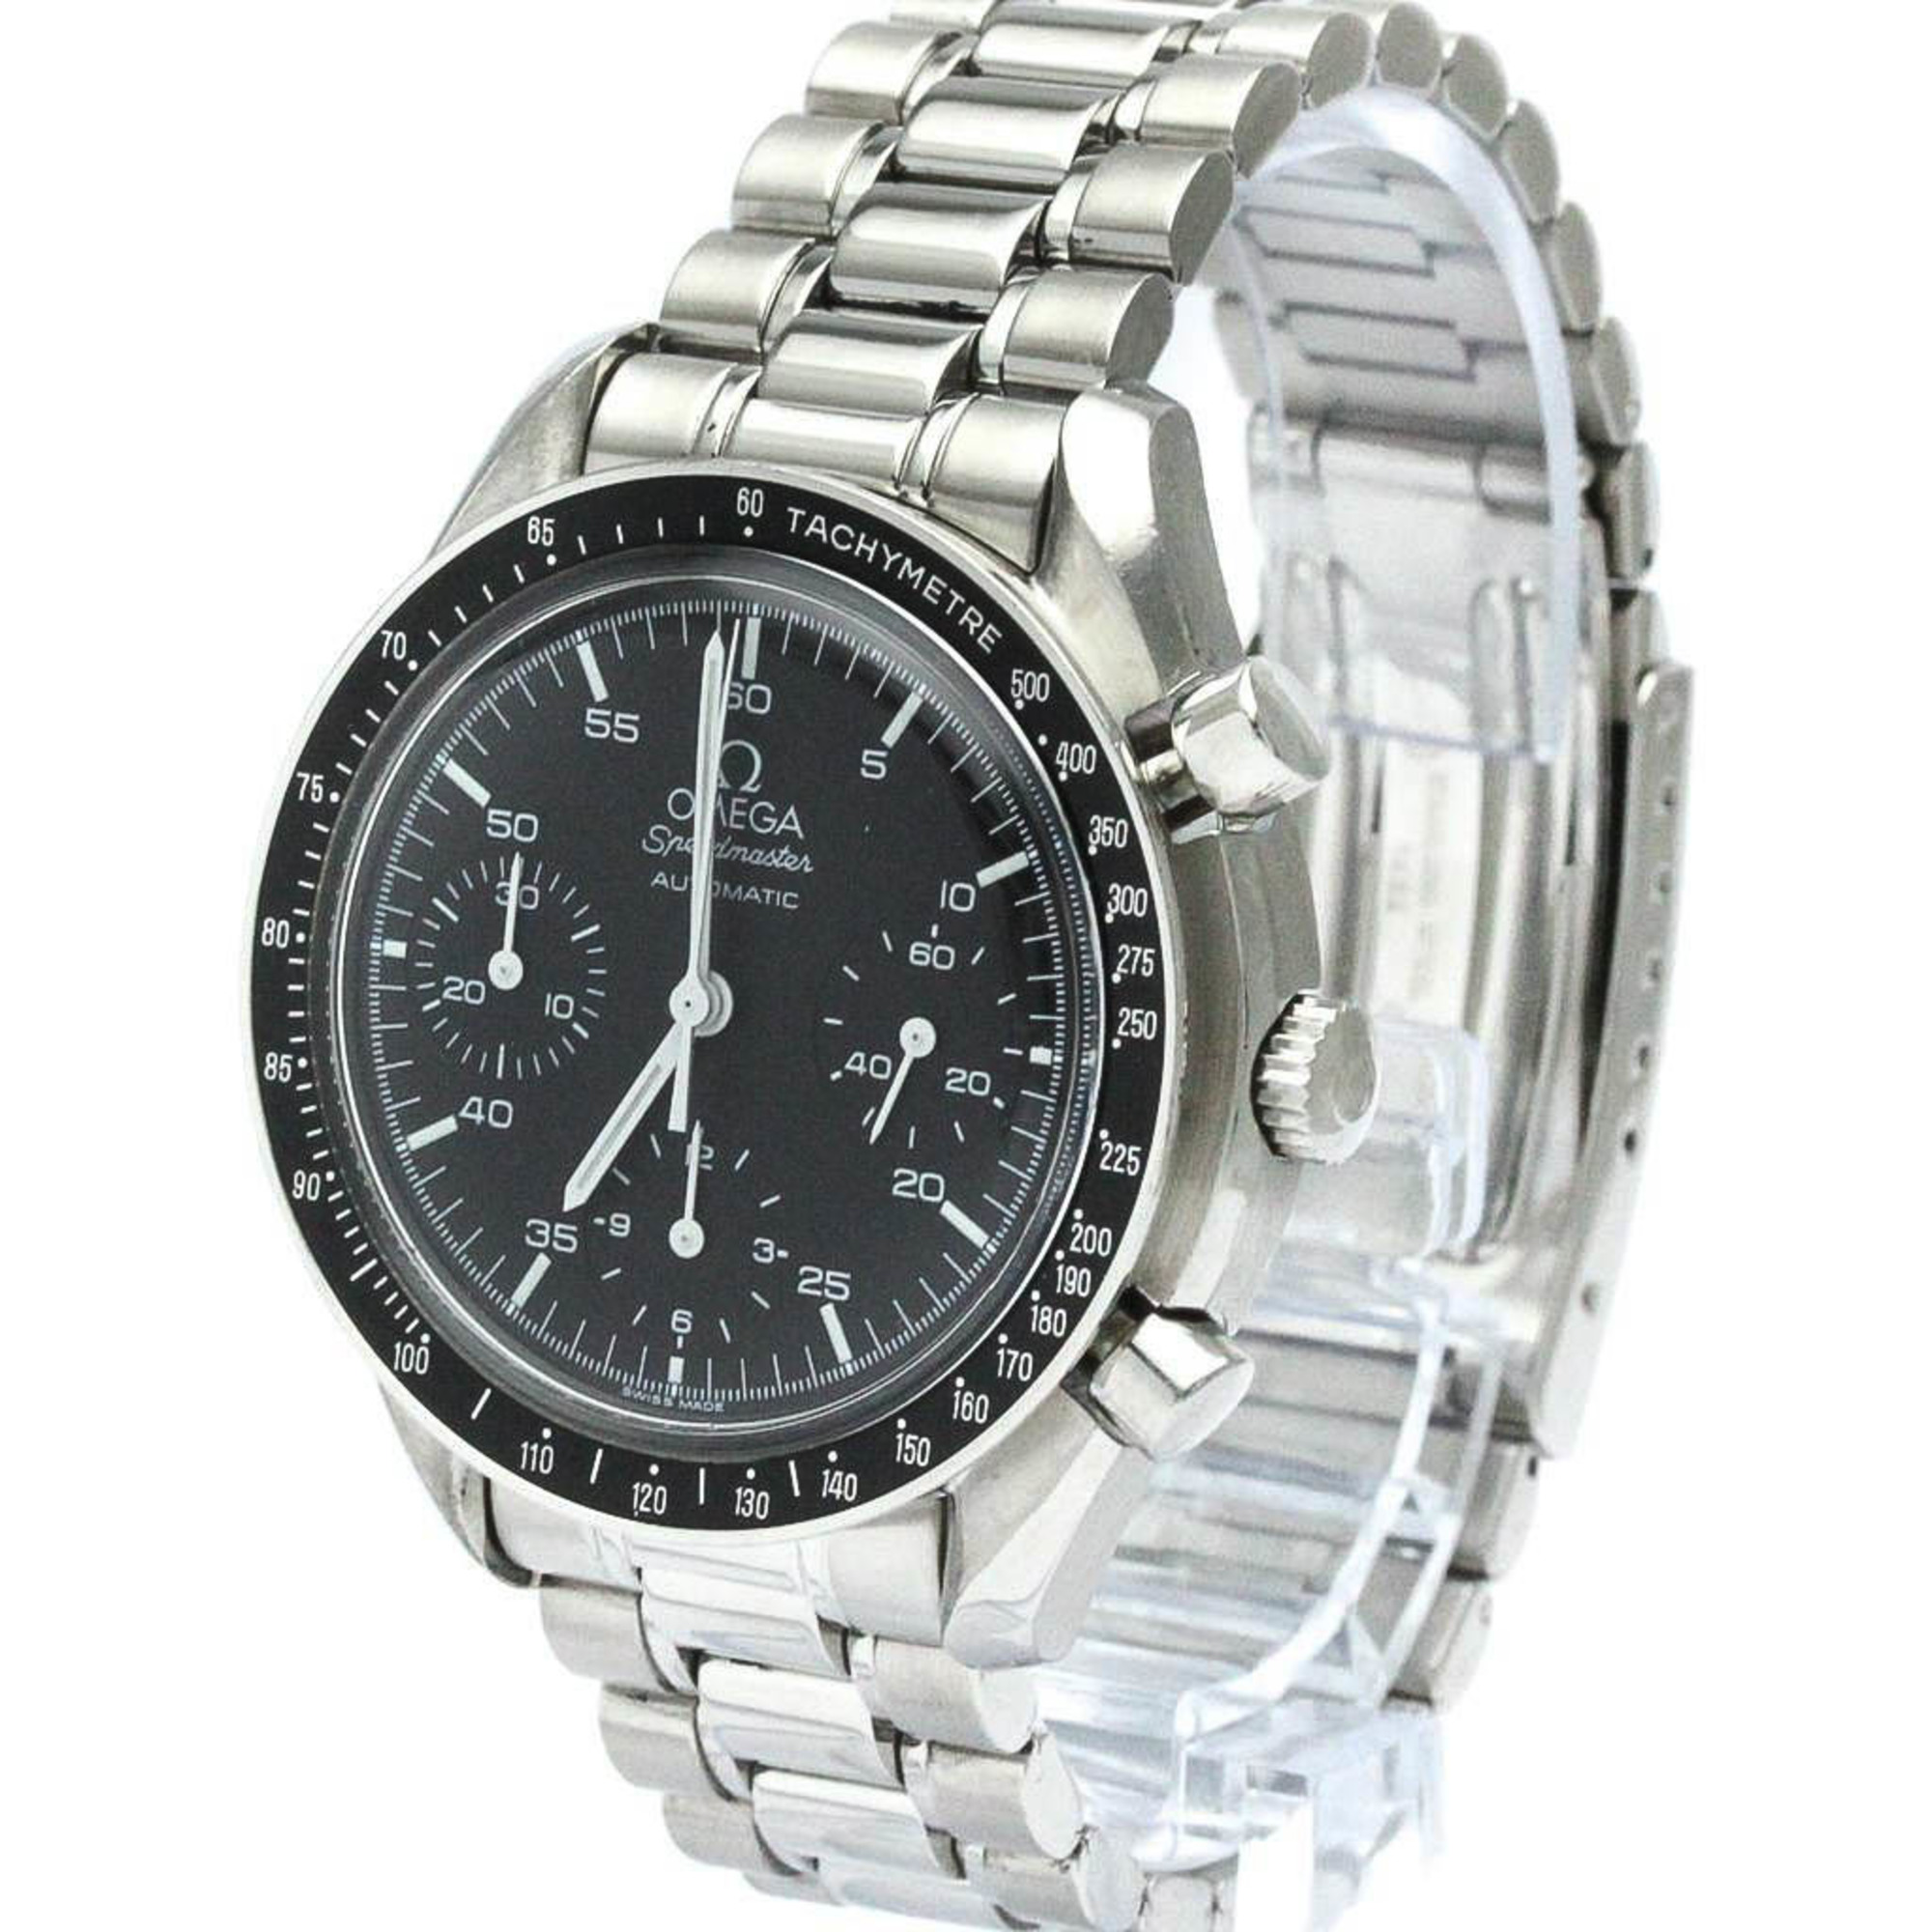 Polished OMEGA Speedmaster Automatic Steel Mens Watch 3510.50 BF565452